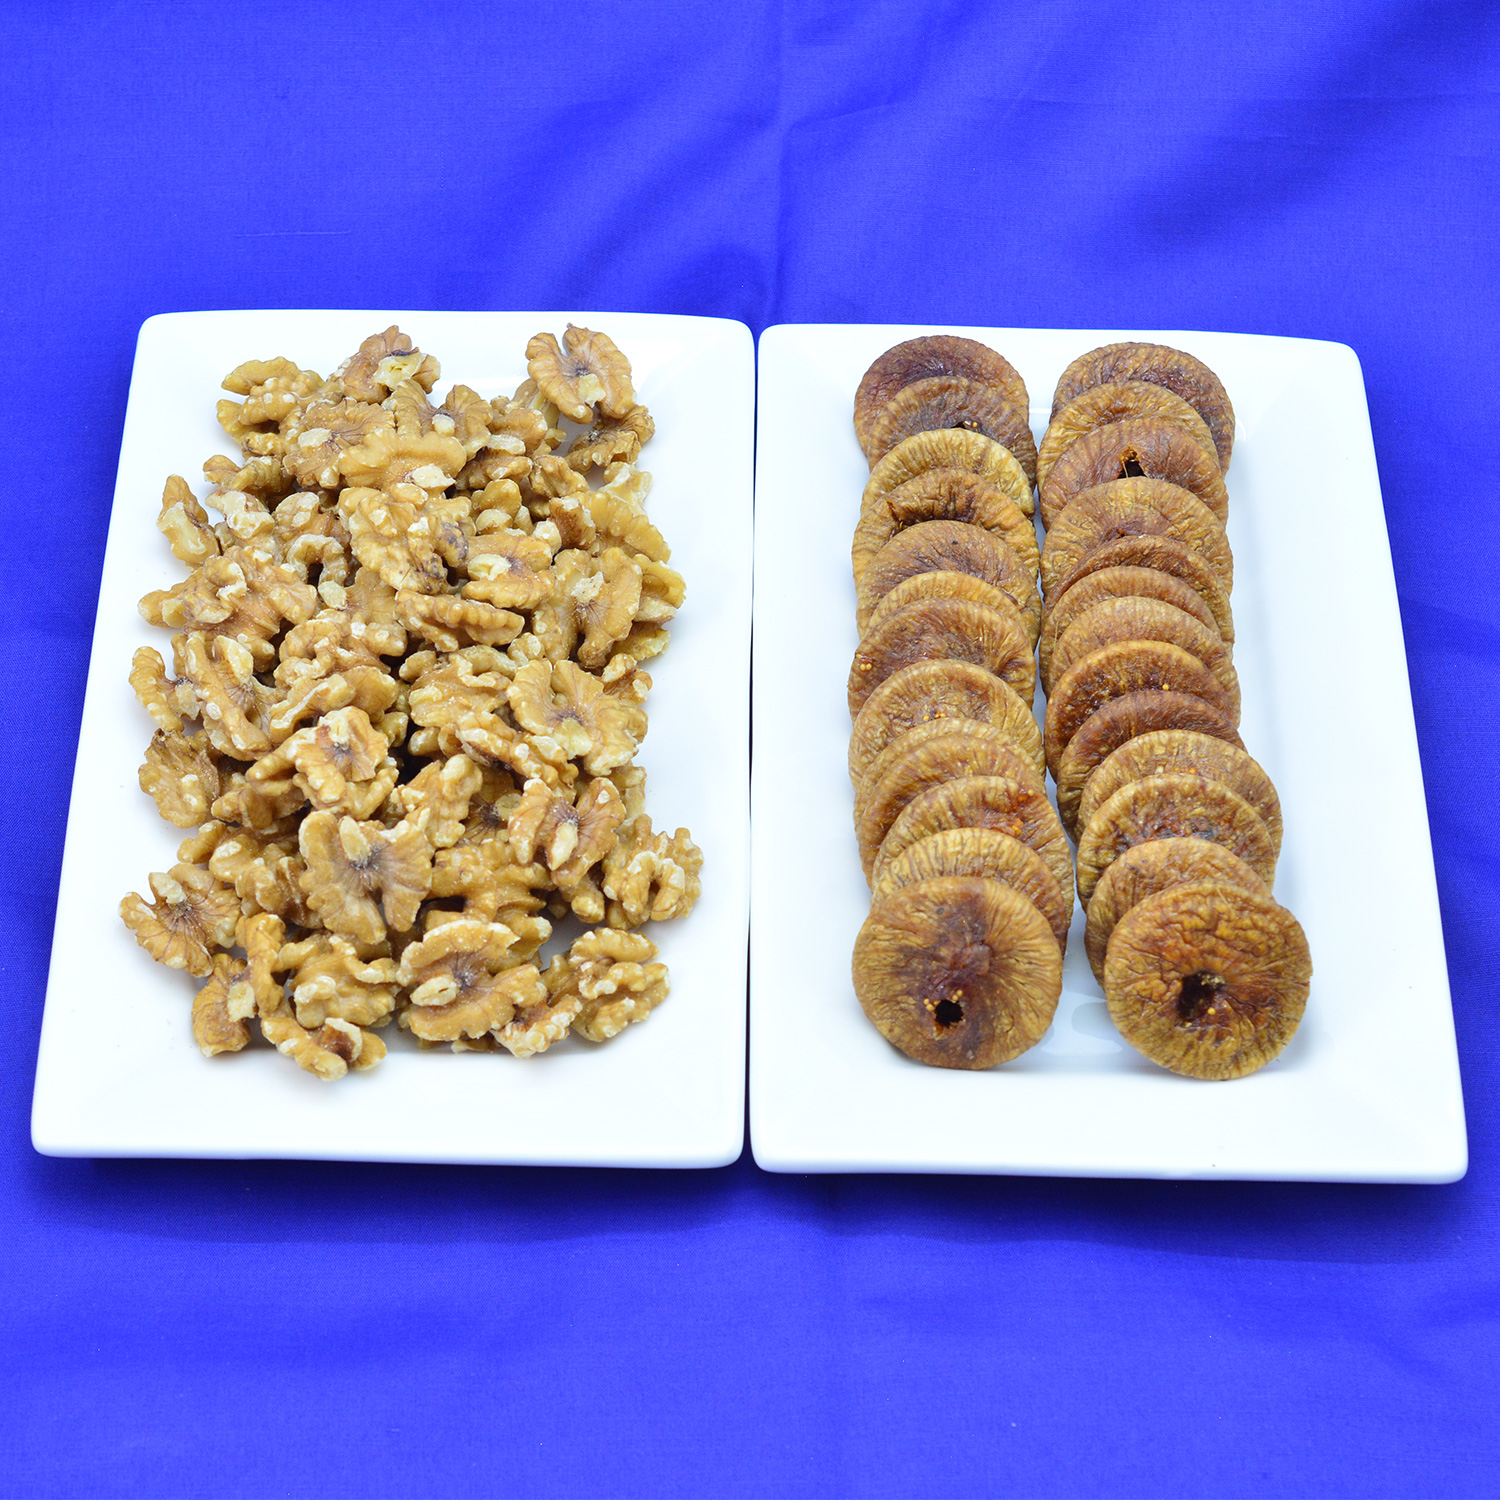 Full of Protein Walnuts with Anjeer Dry Fruits for Healthy Body